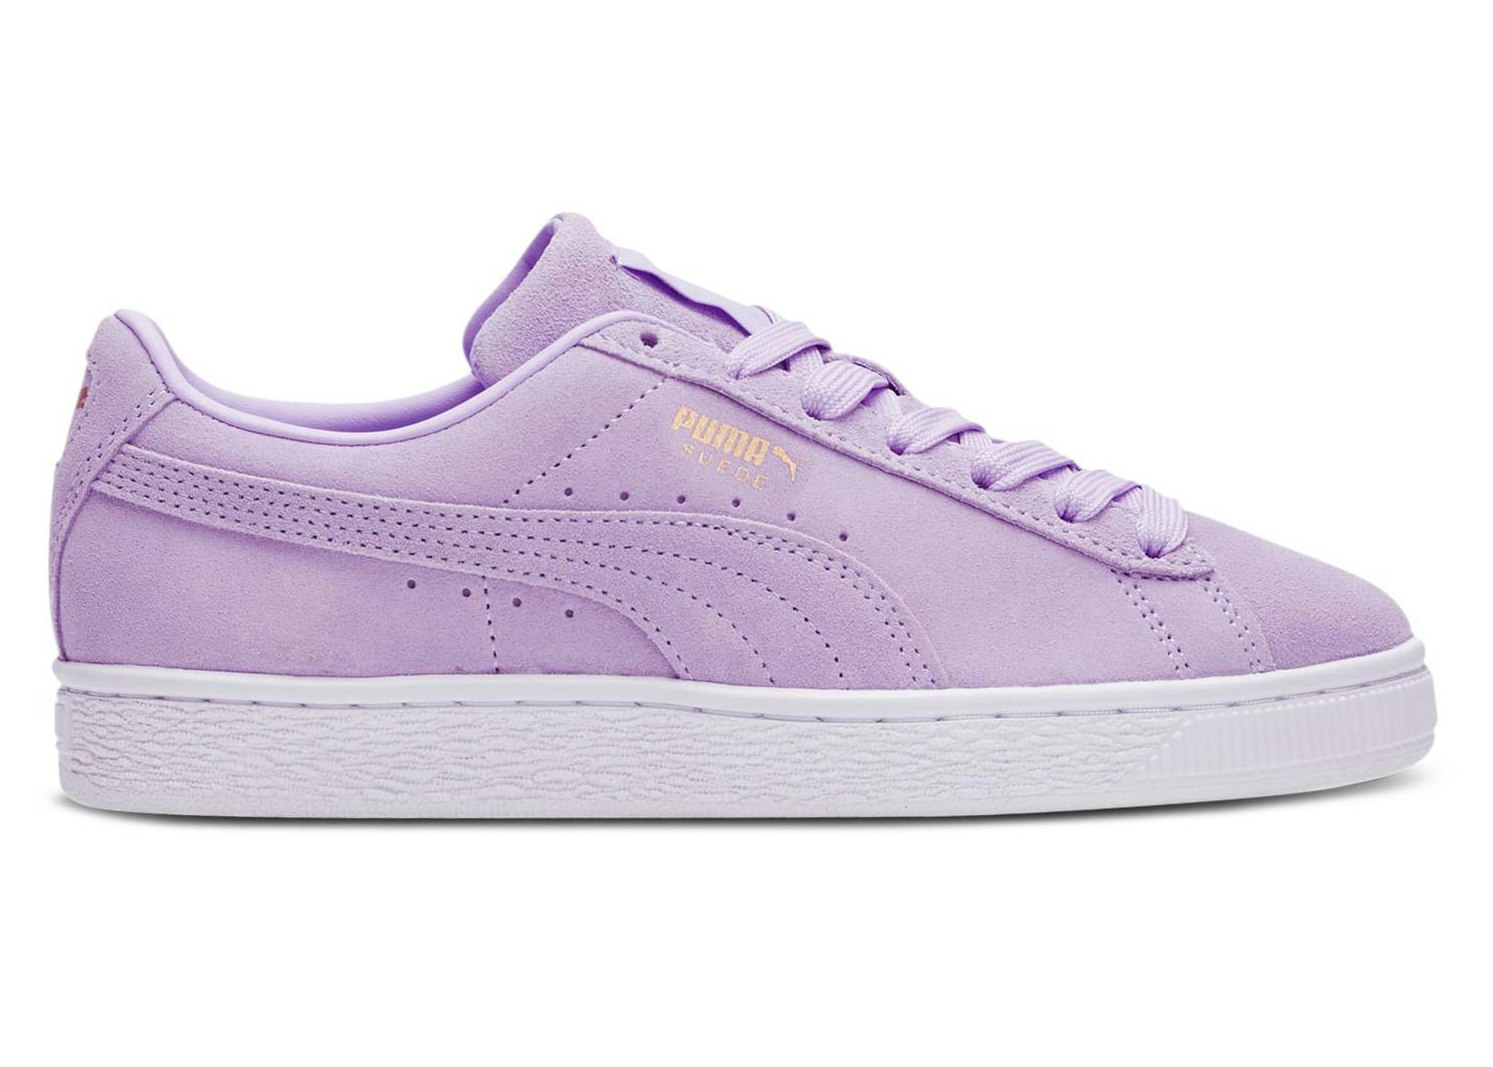 Buy PUMA Women's Suede Classic Sneaker at Ubuy India